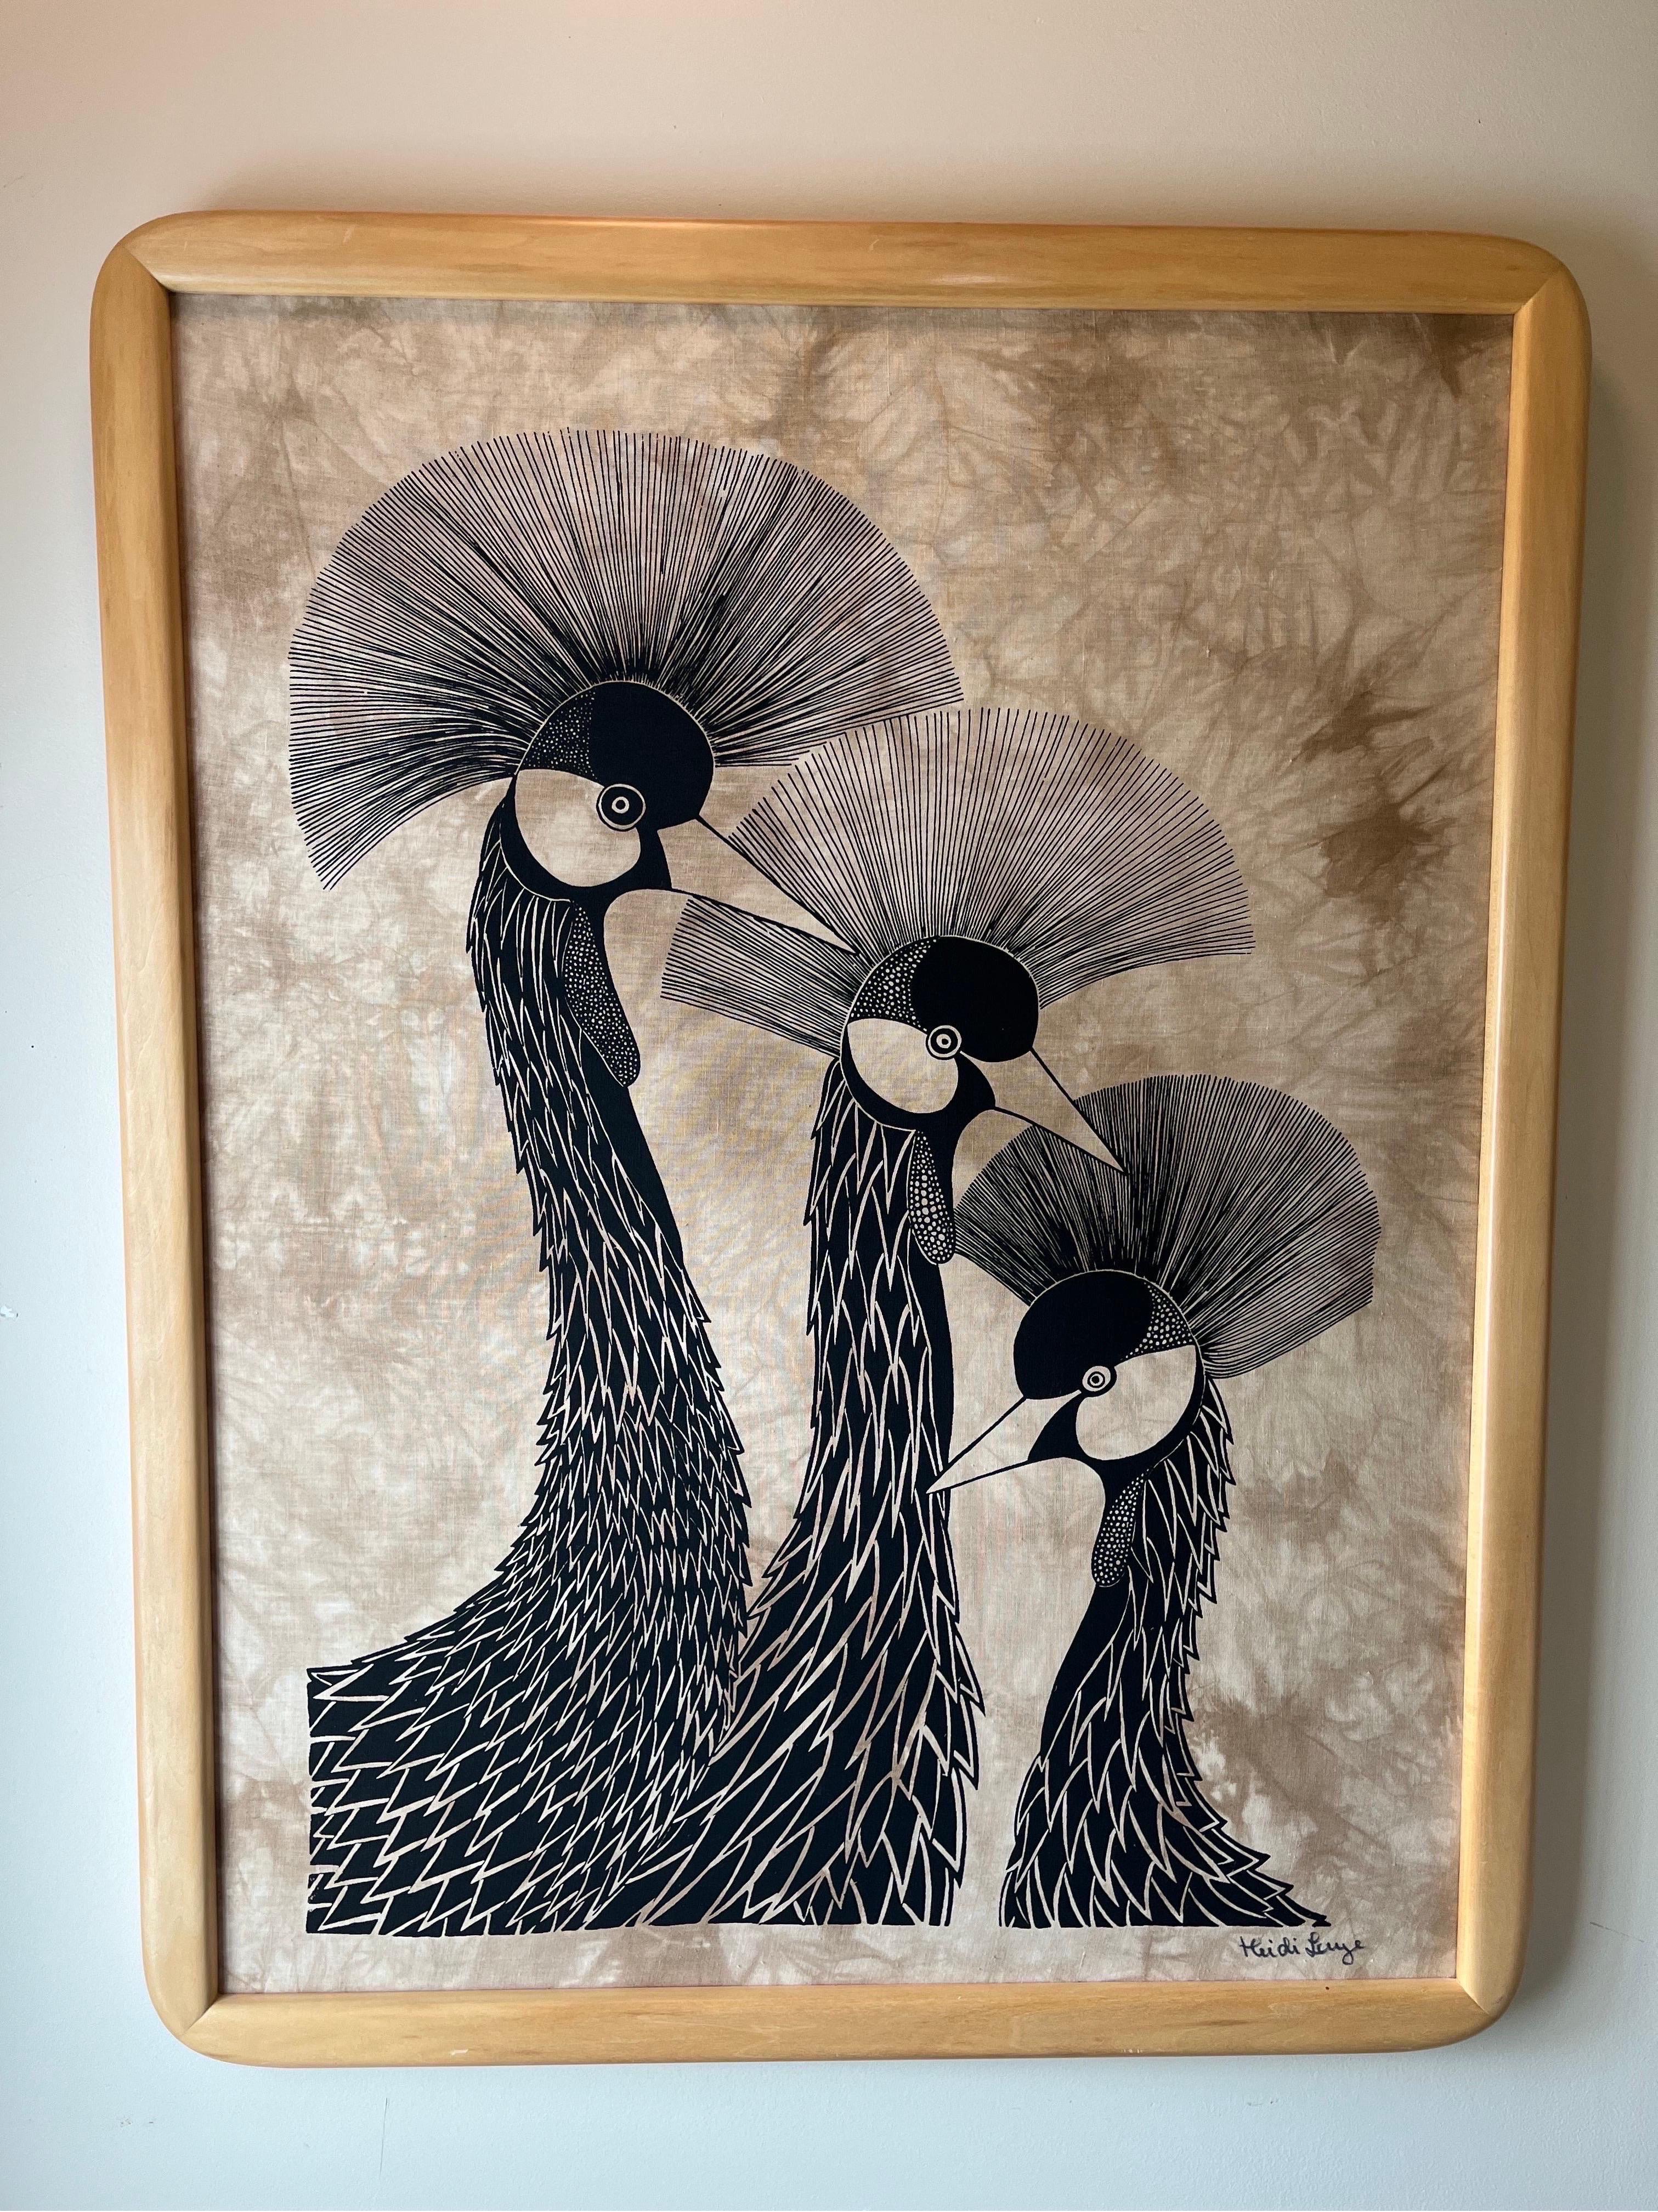 Beautiful Batik depicting  3 stylized preening Cranes by Swedish artist Heidi Lange. Great visual and contrast.
Curbside to NYC/Philly $350